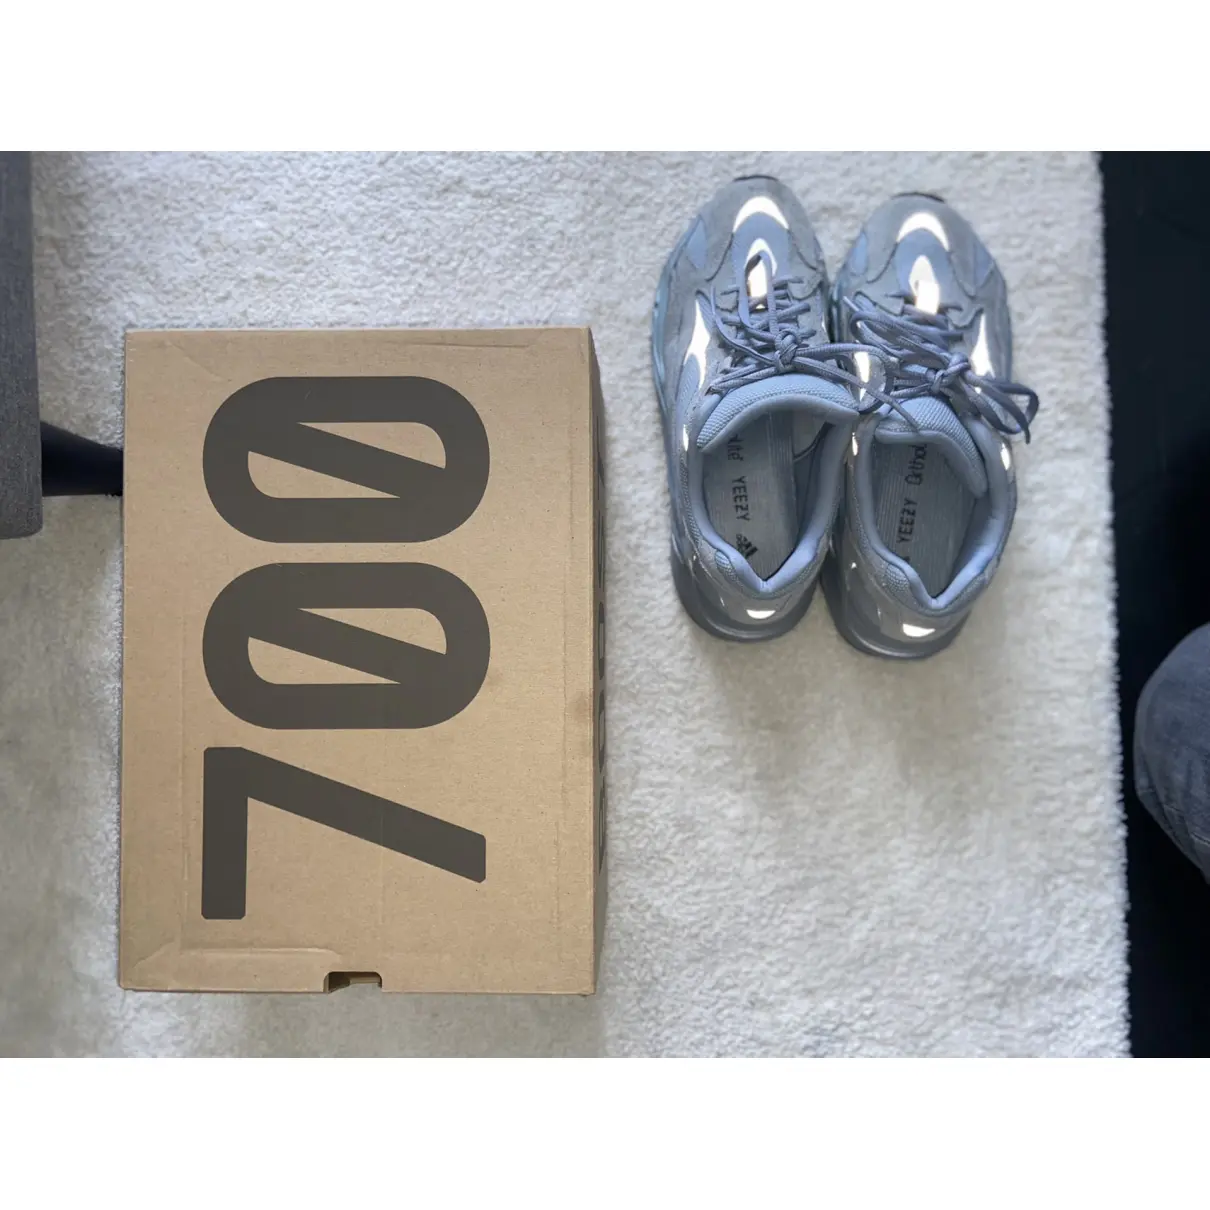 Buy Yeezy x Adidas Boost 700 V2 low trainers online